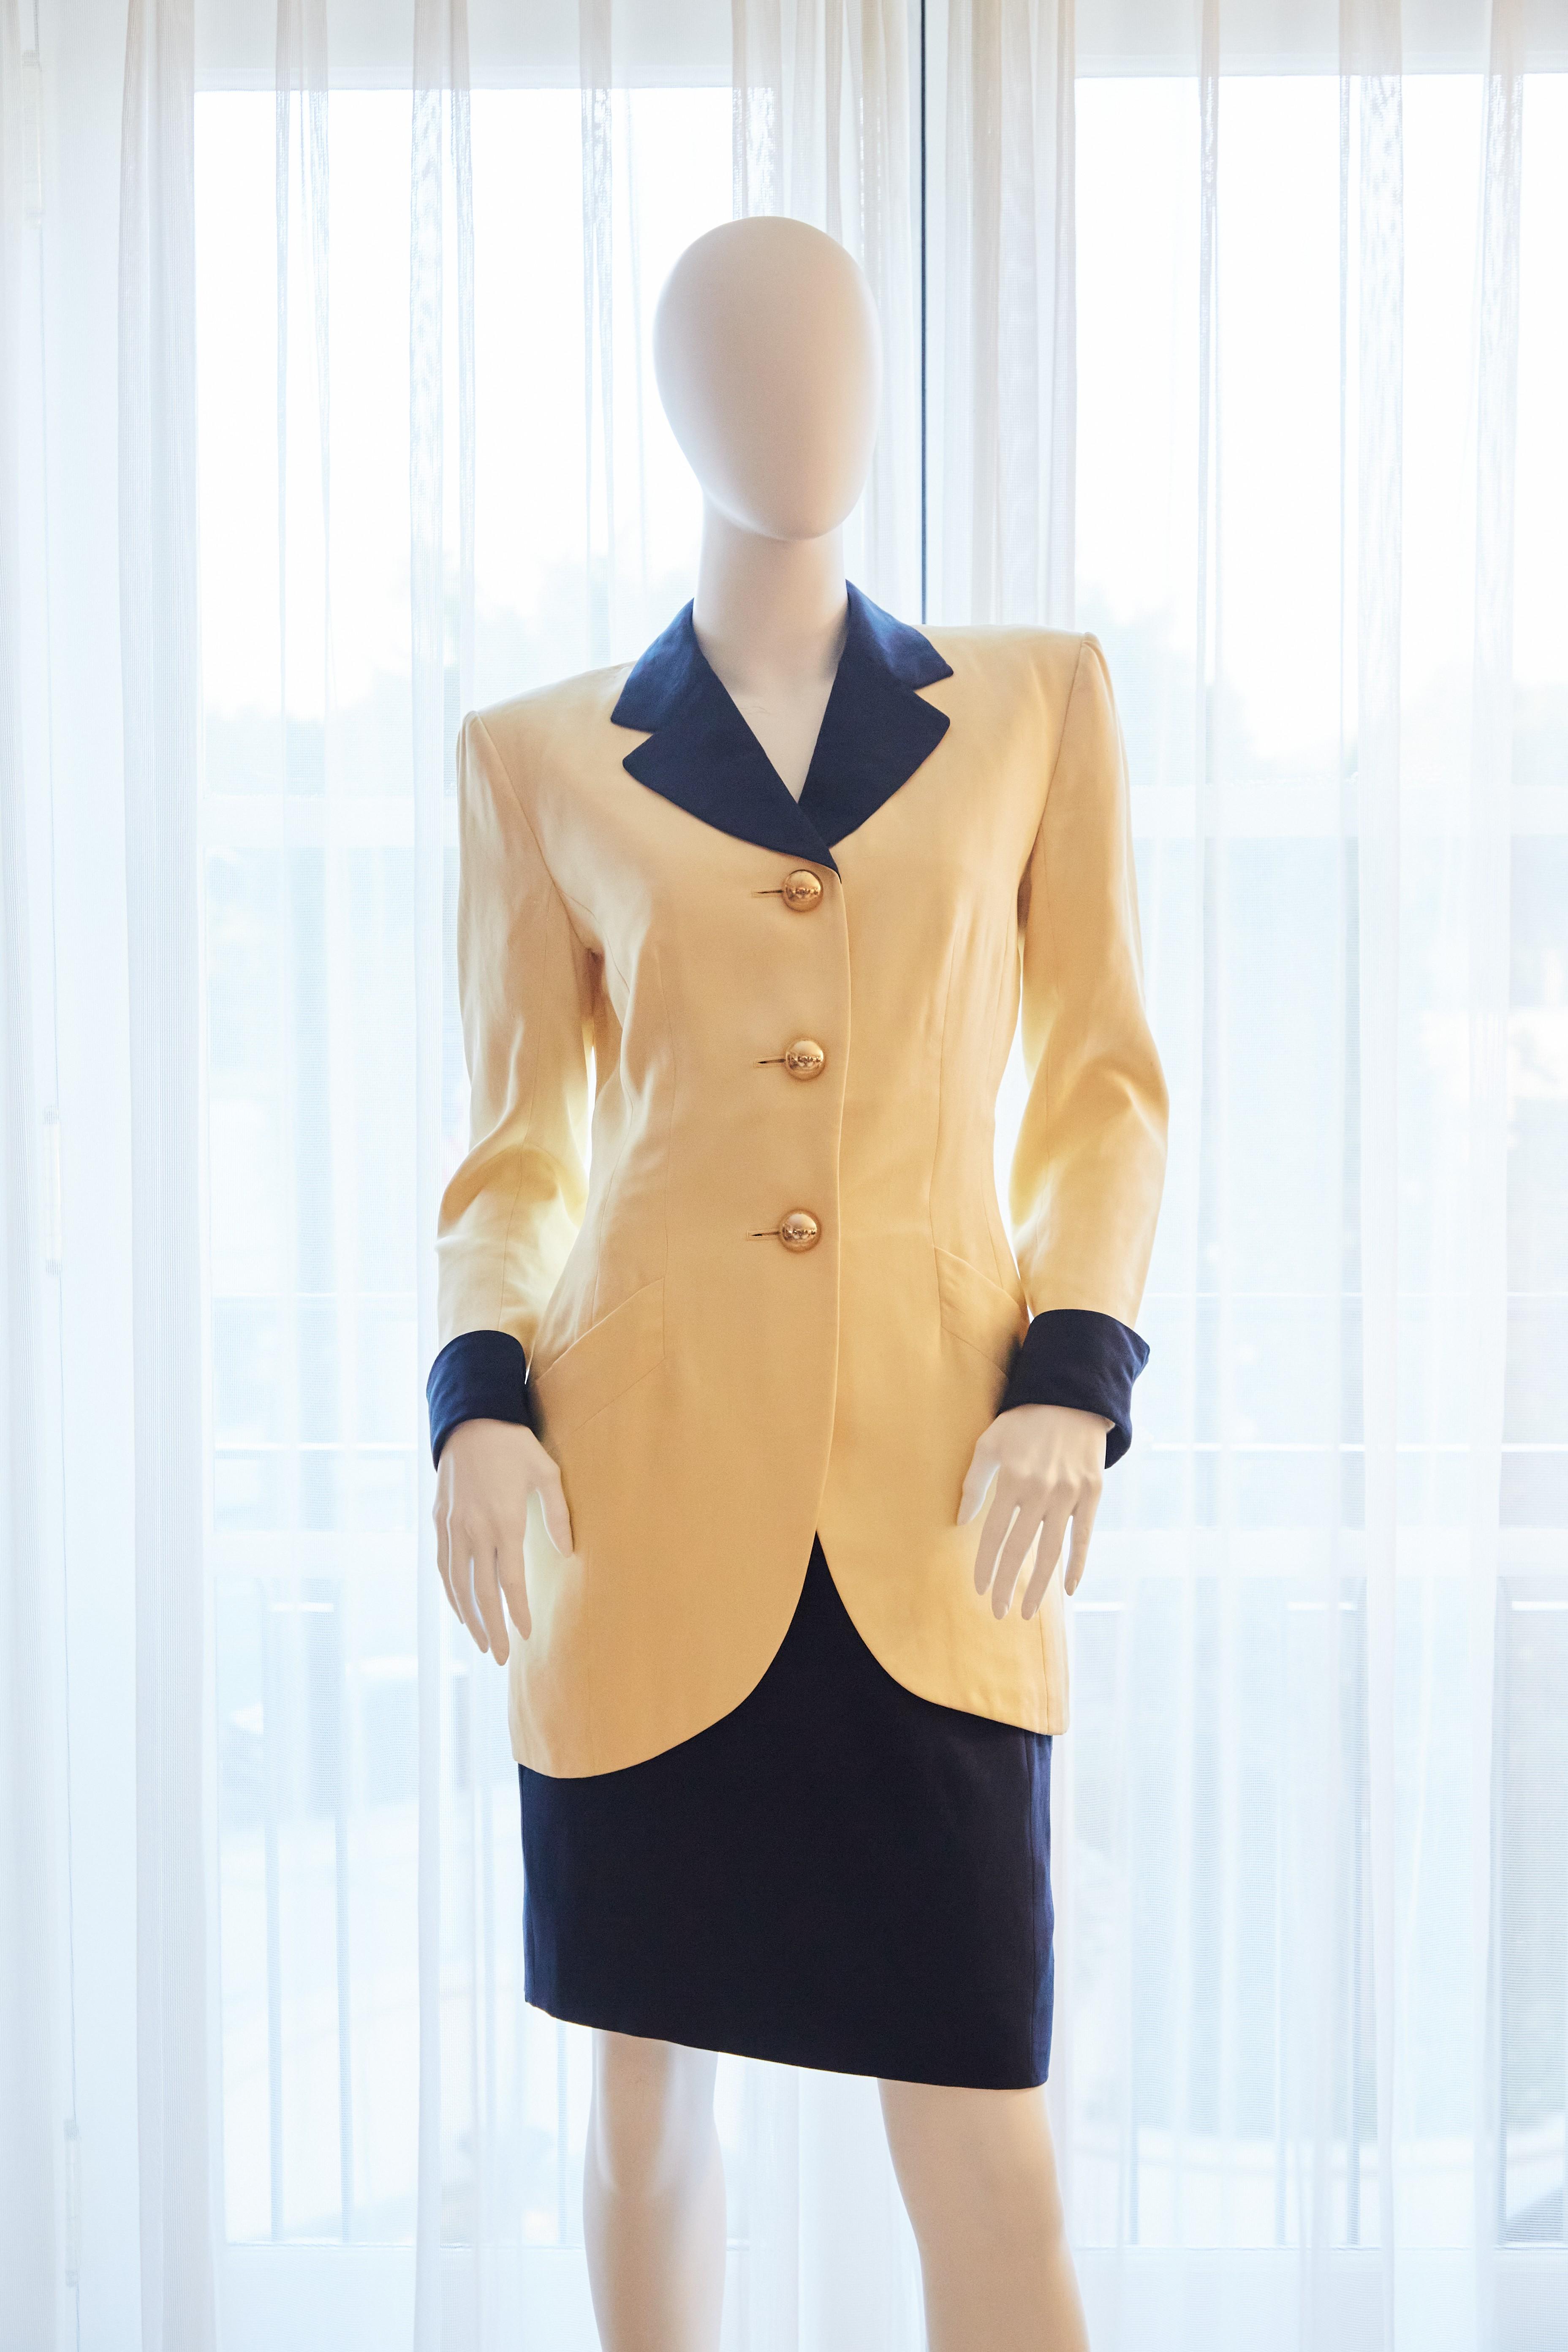 a mannequin is wearing a yellow jacket and black skirt